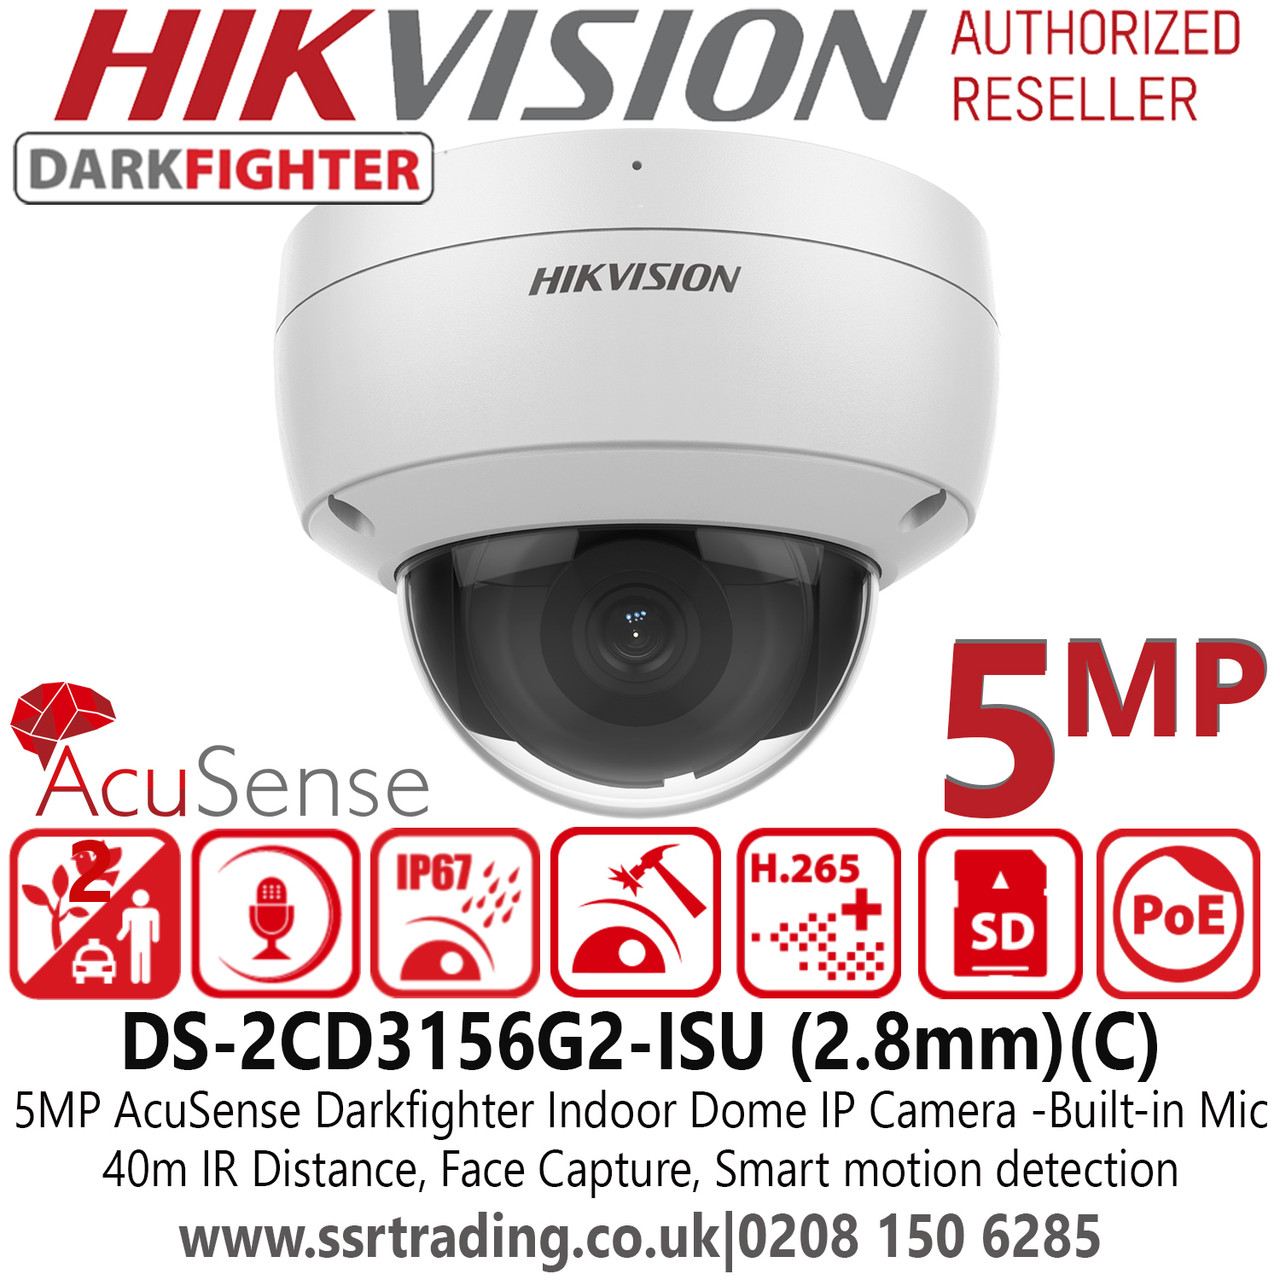 5MP Network CCTV Camera - Hikvision 5MP IP PoE Dome Camera - AcuSense -  Darkfighter - 2.8mm Lens - Face Capture - Built-in mic - Water and dust  resistant (IP67) and vandal-resistant (